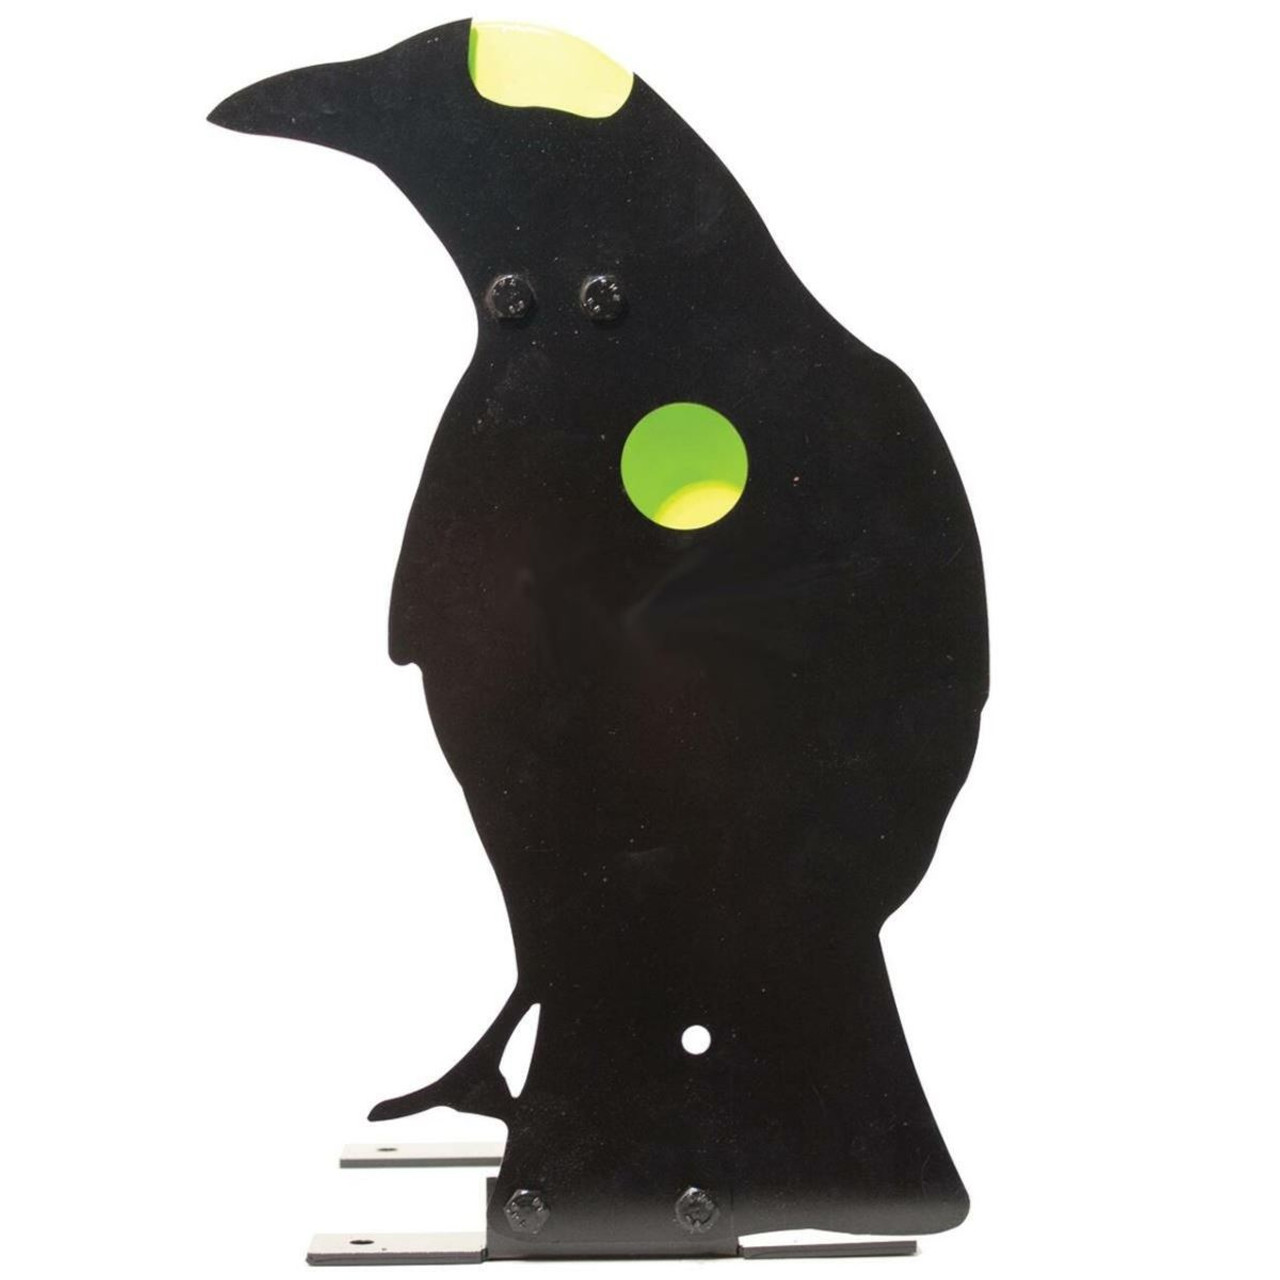 Gr8fun Kill Zone Targets Crow Metal Silhouette with resetting paddles